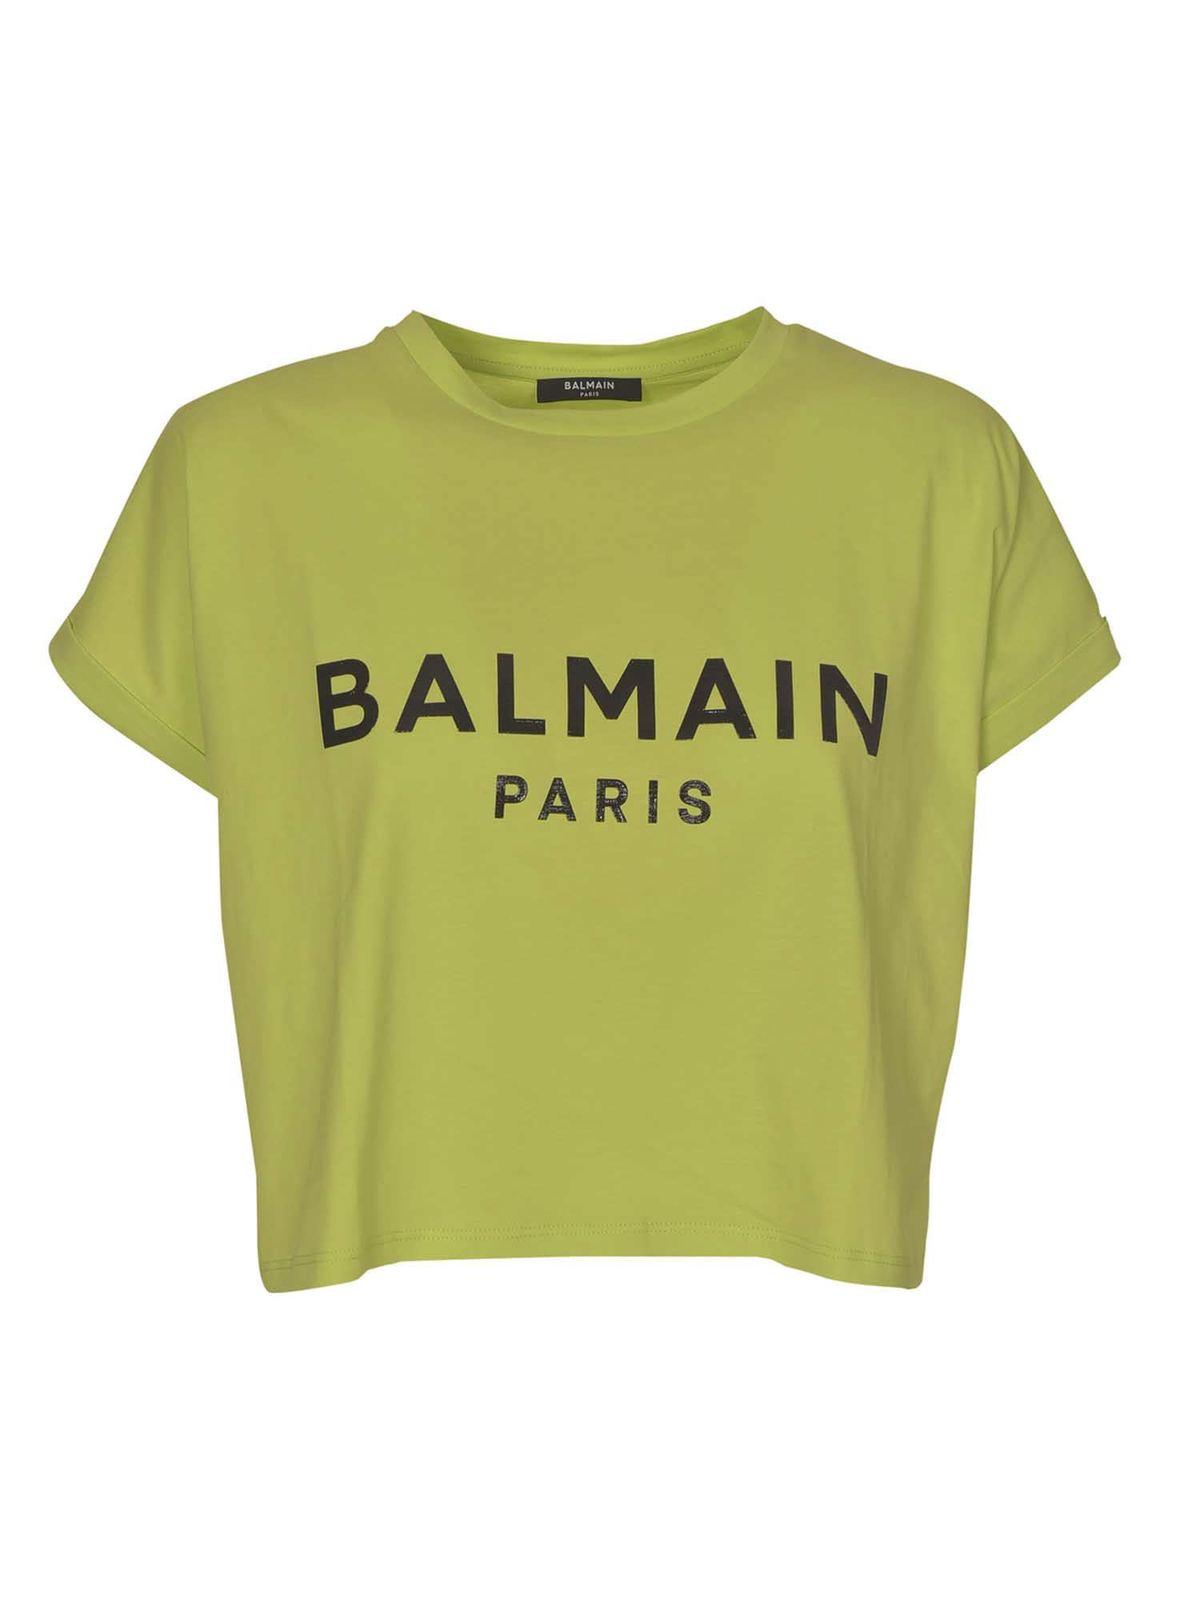 BALMAIN CROPPED T-SHIRT IN YELLOW AND BLACK